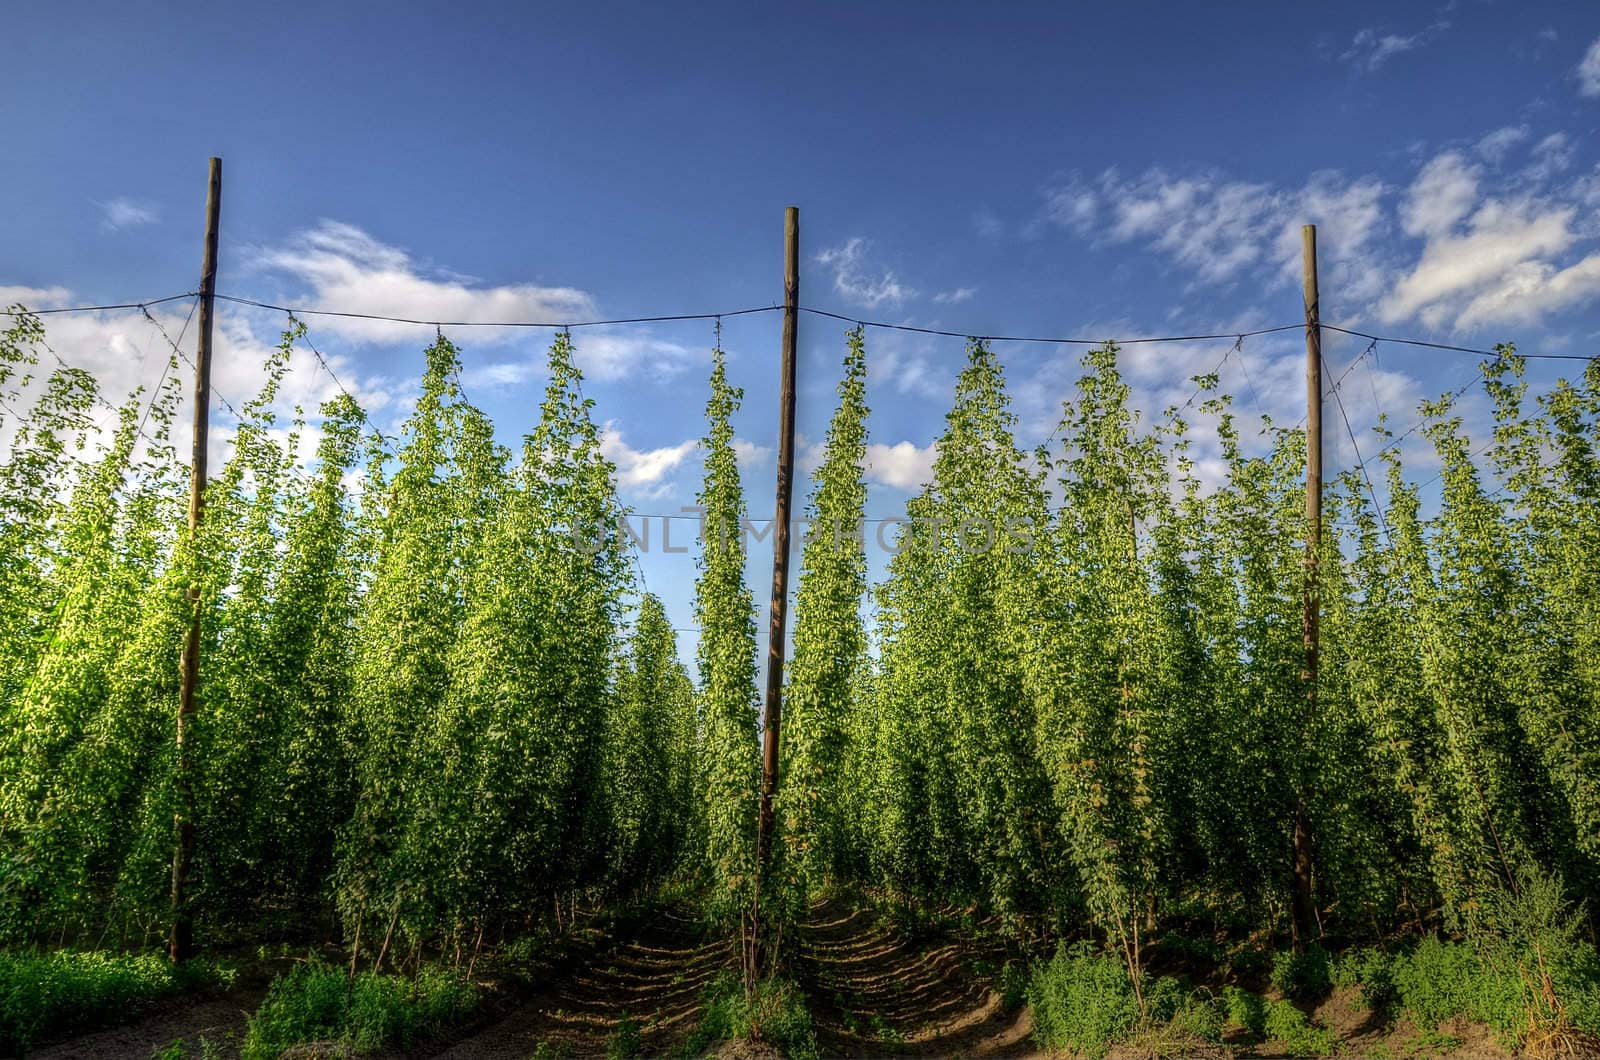 The photo shows the construction and the hop plant HDR.